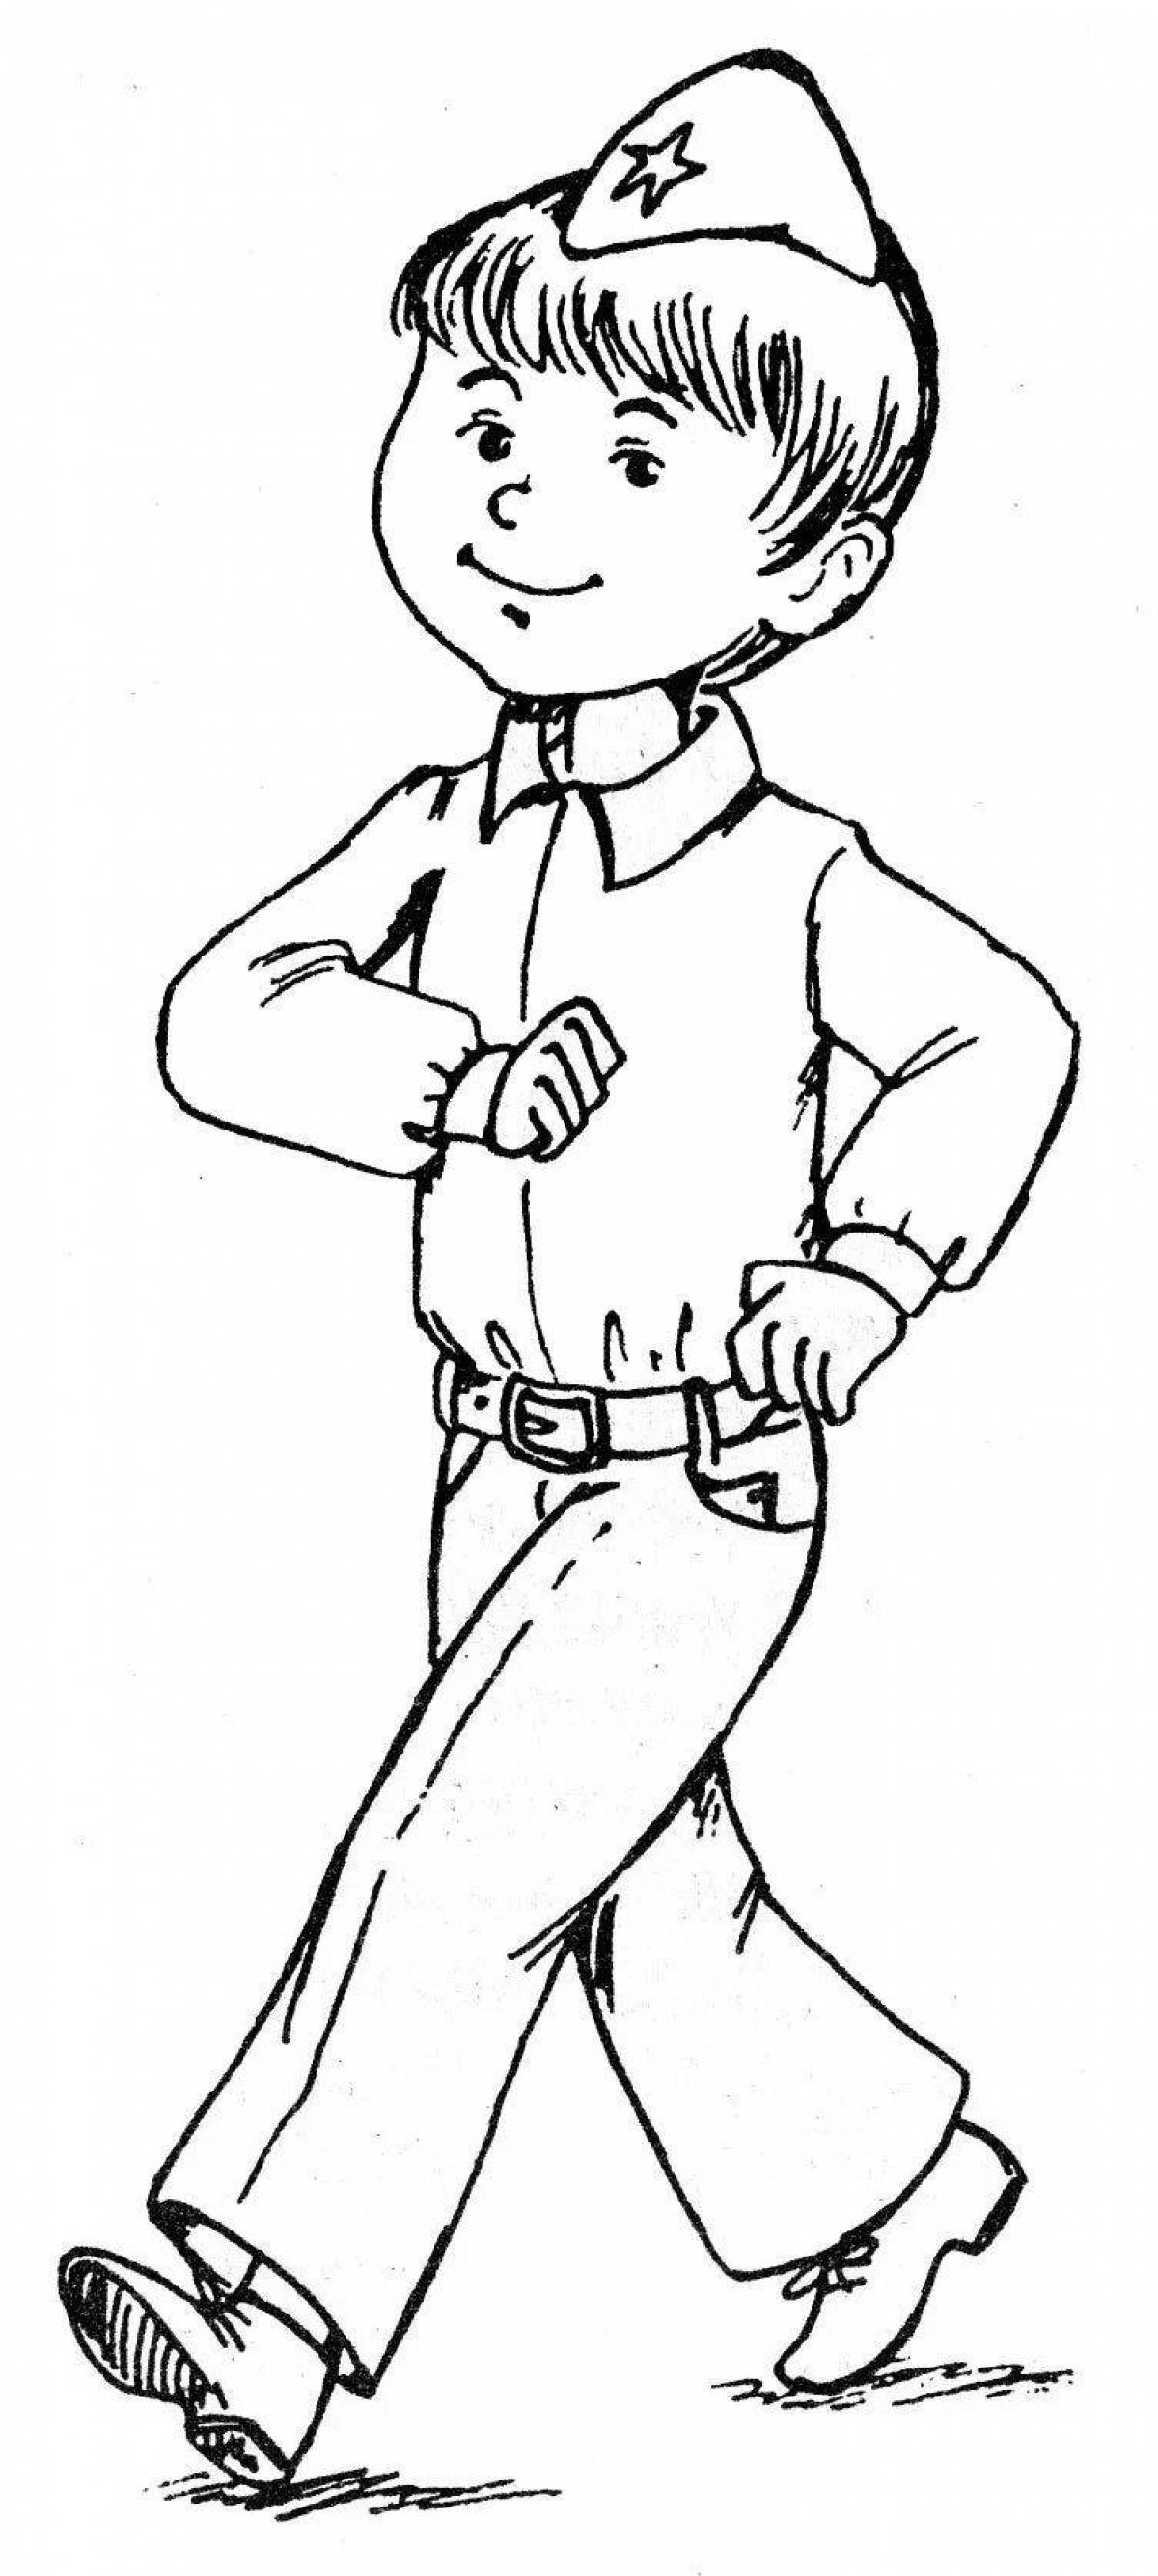 Fire Pioneers coloring page